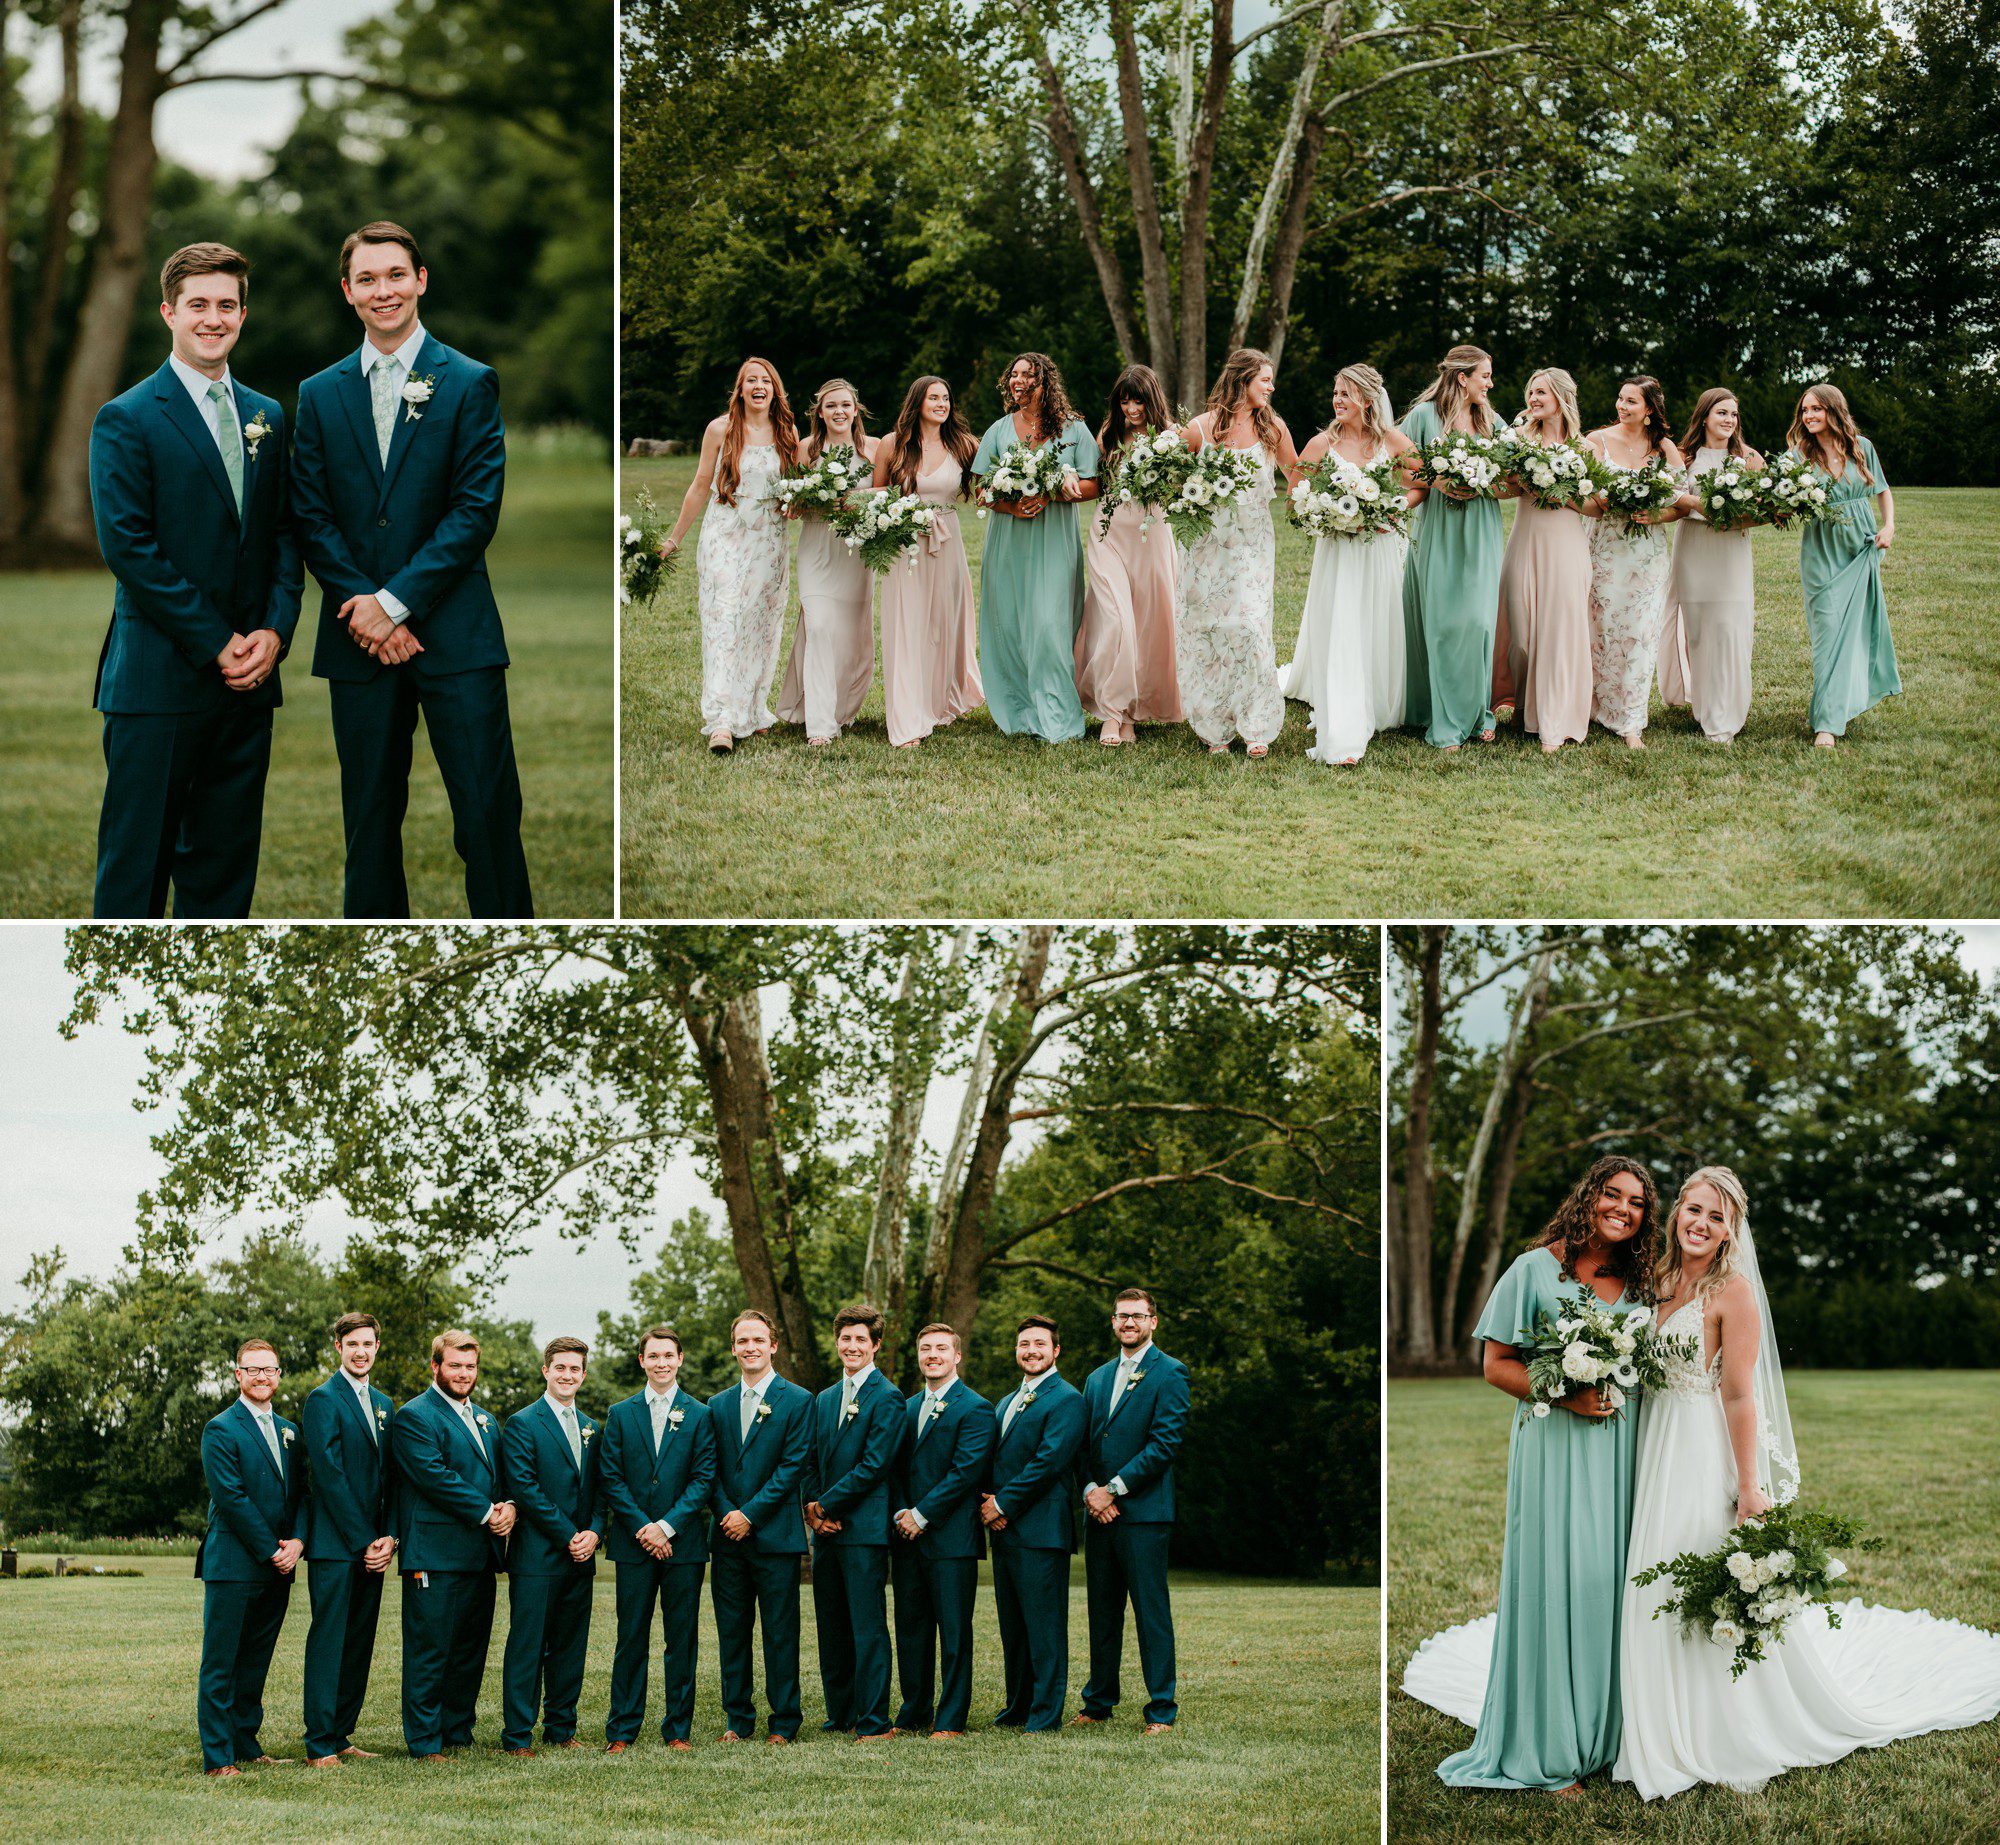 Wedding party attire with mixed pastel bridesmaid dresses by Show Me Your Mumu